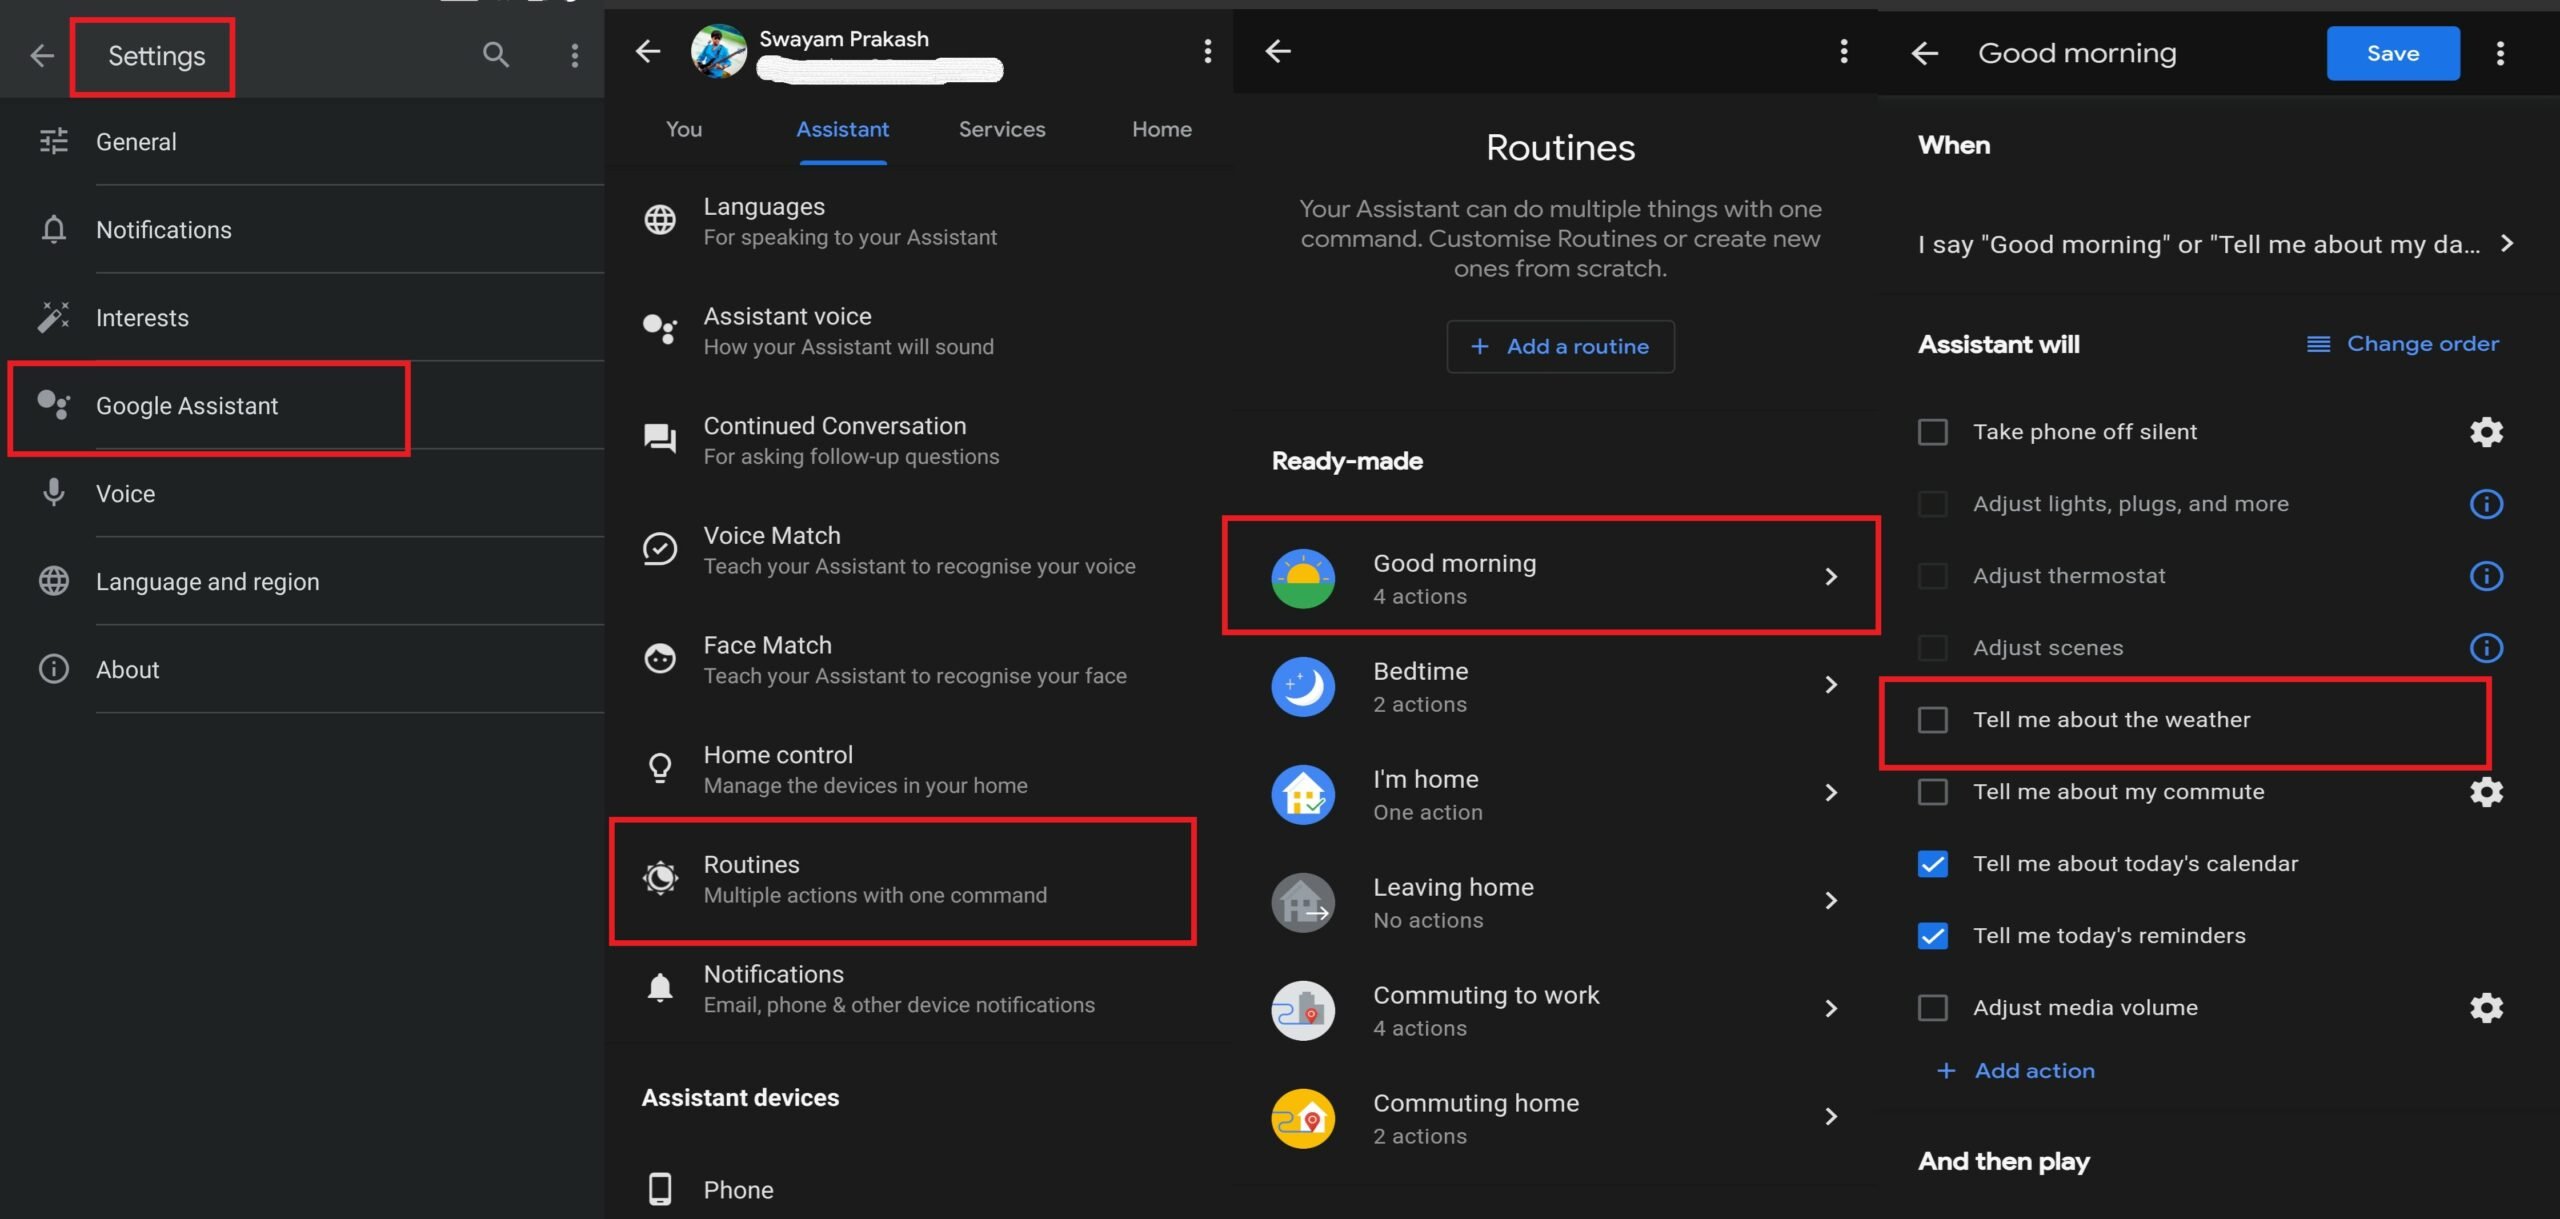 disable weather notification alert from Google App